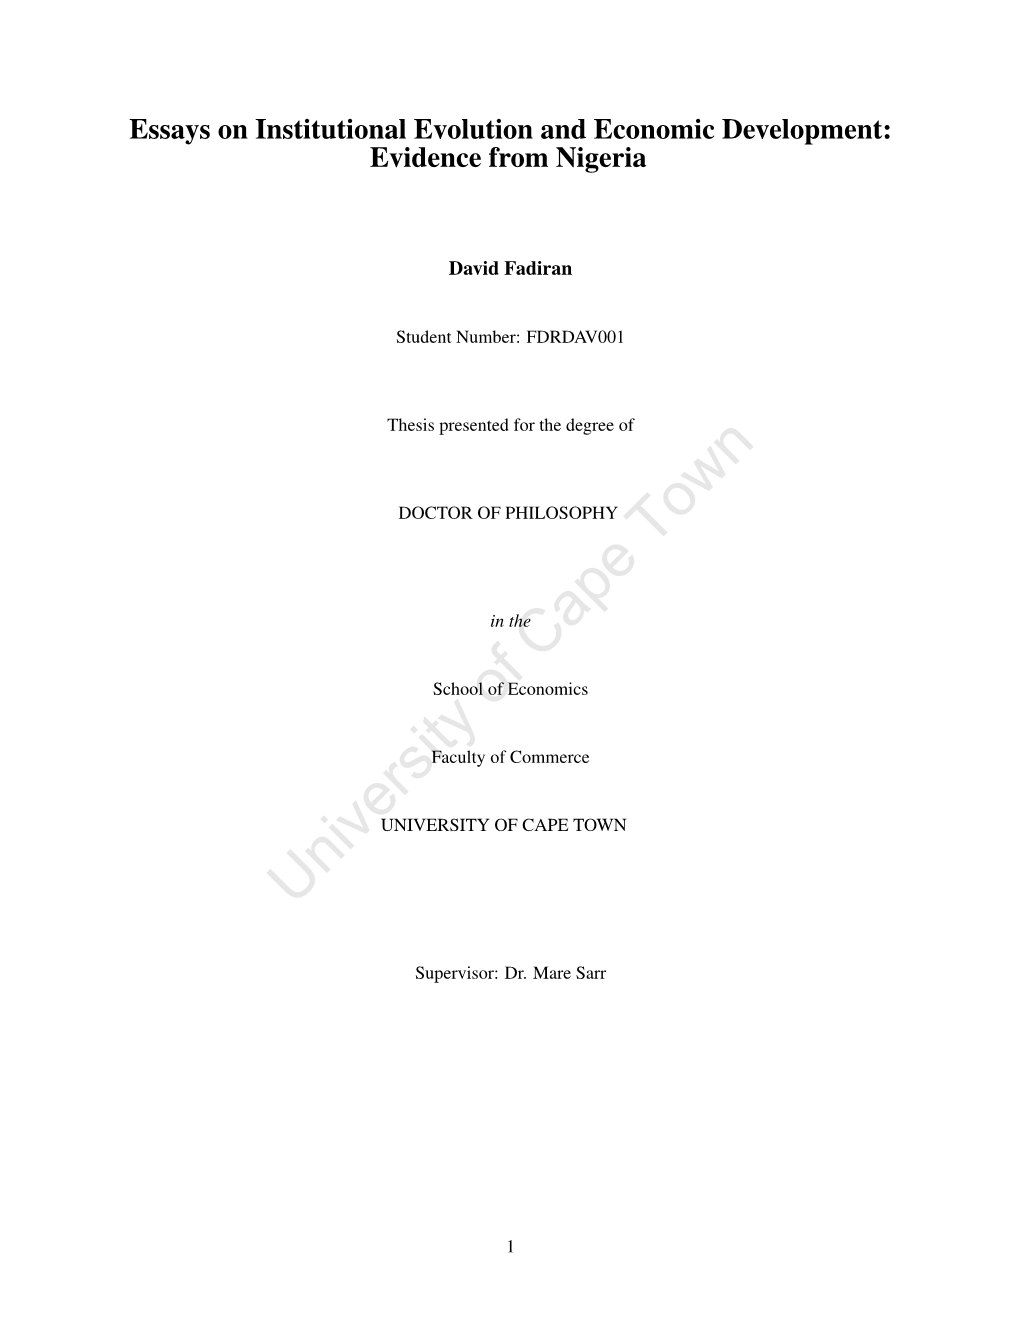 Essays on Institutional Evolution and Economic Development: Evidence from Nigeria